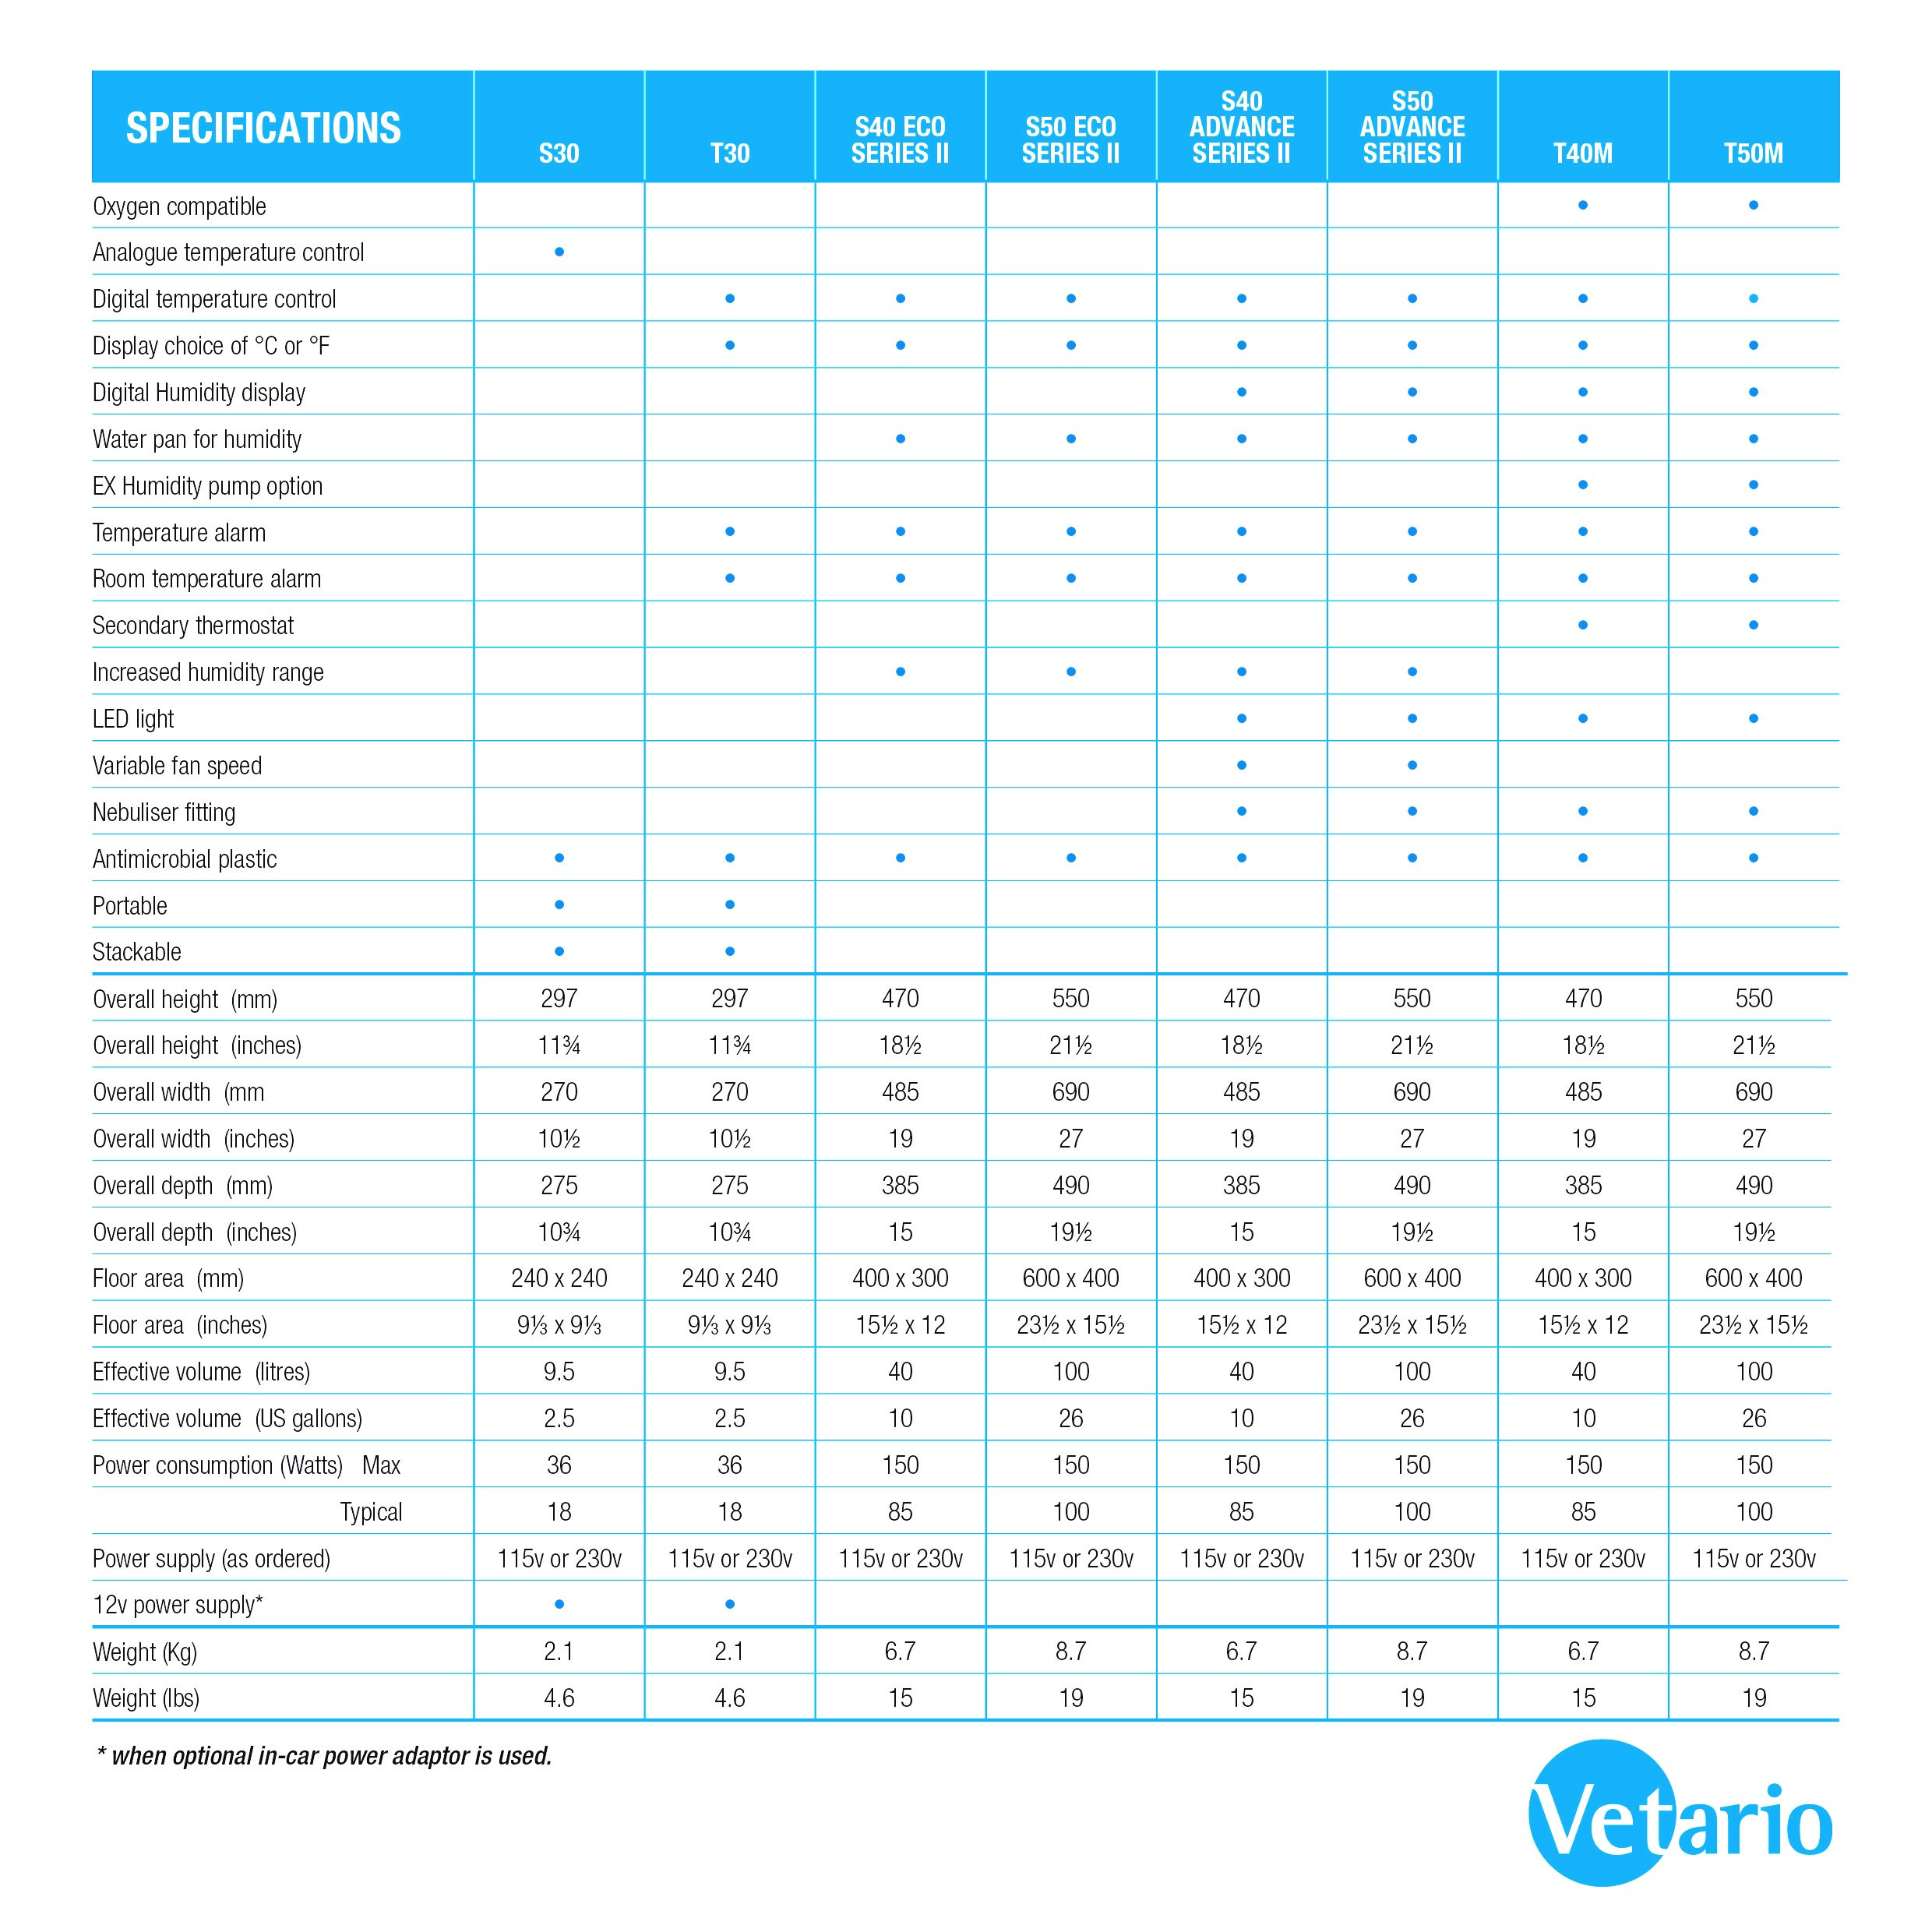 Chart showing the various models and specifications of Vetario intensive care units